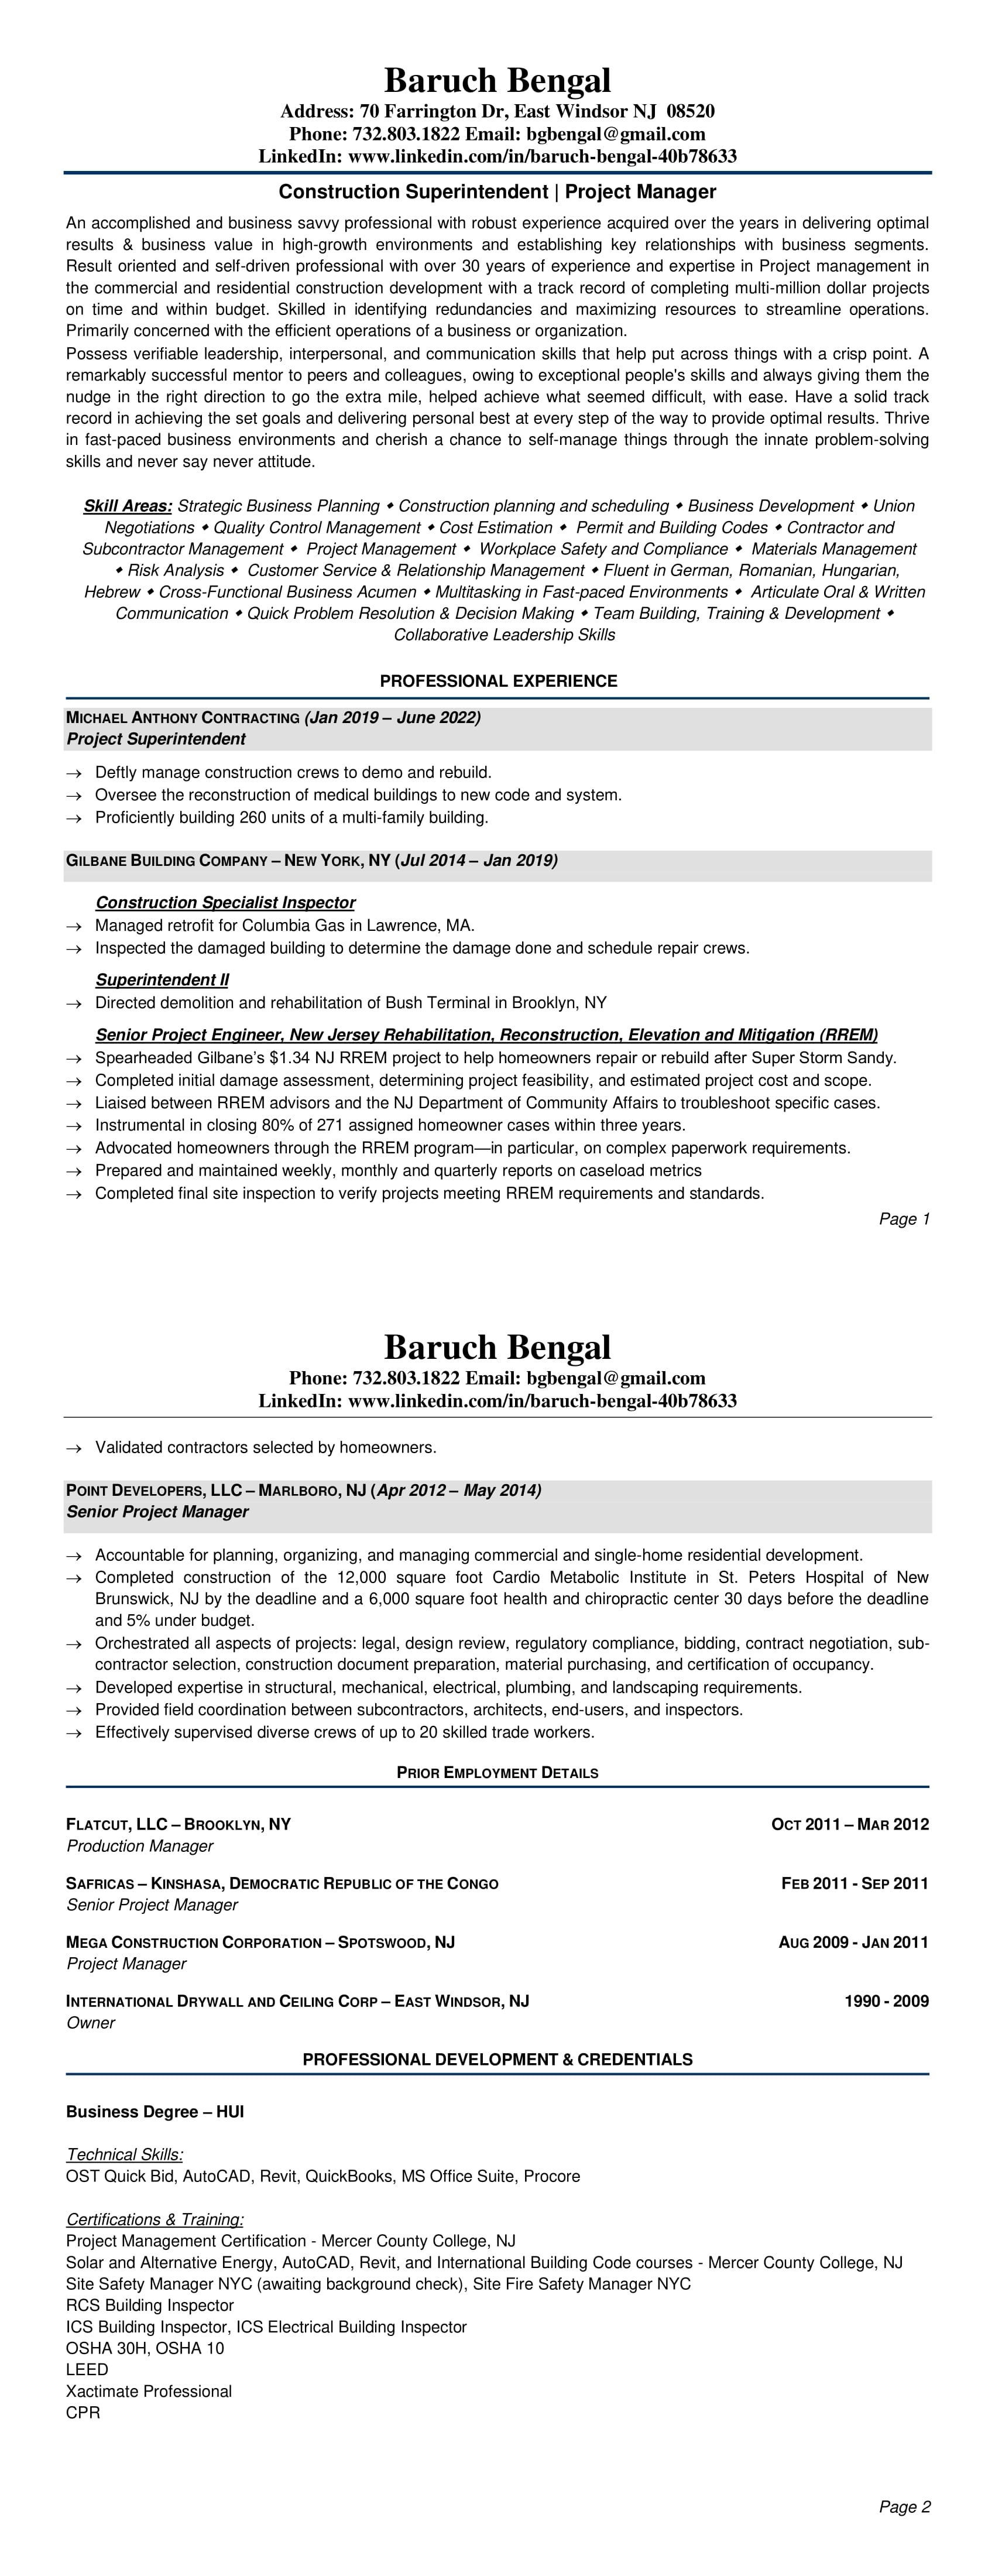 baruch resume writing guide